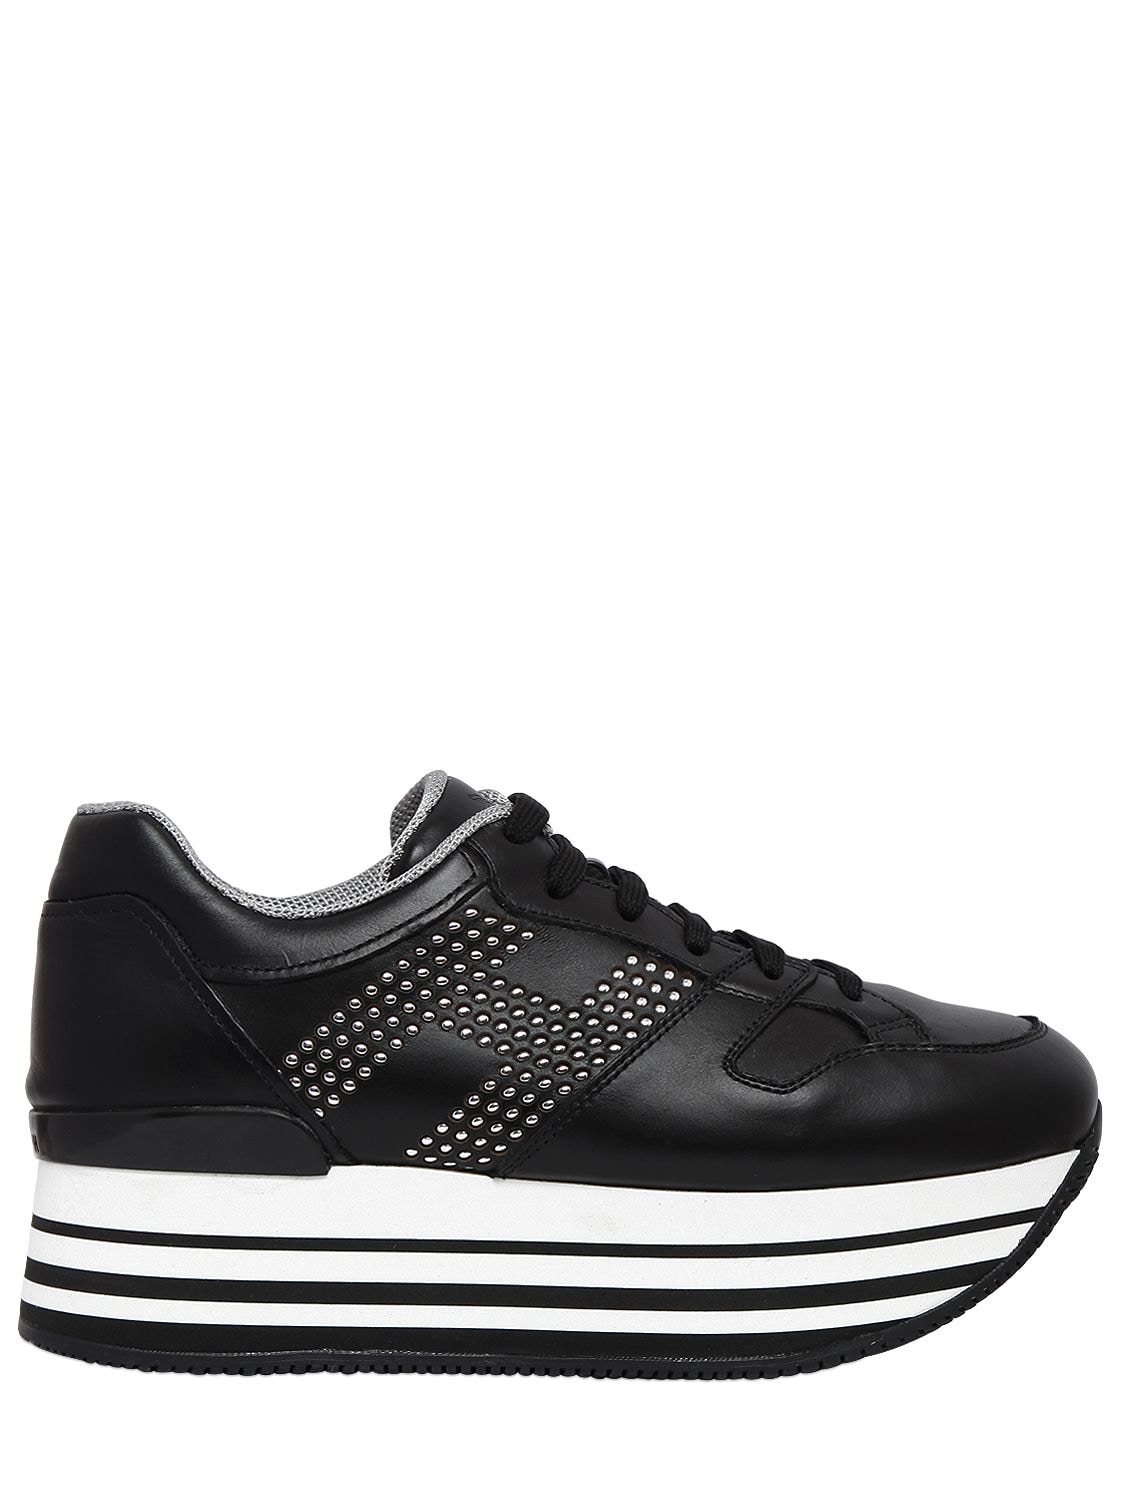 Hogan 70mm Maxi 222 Studded Leather Sneakers In Black